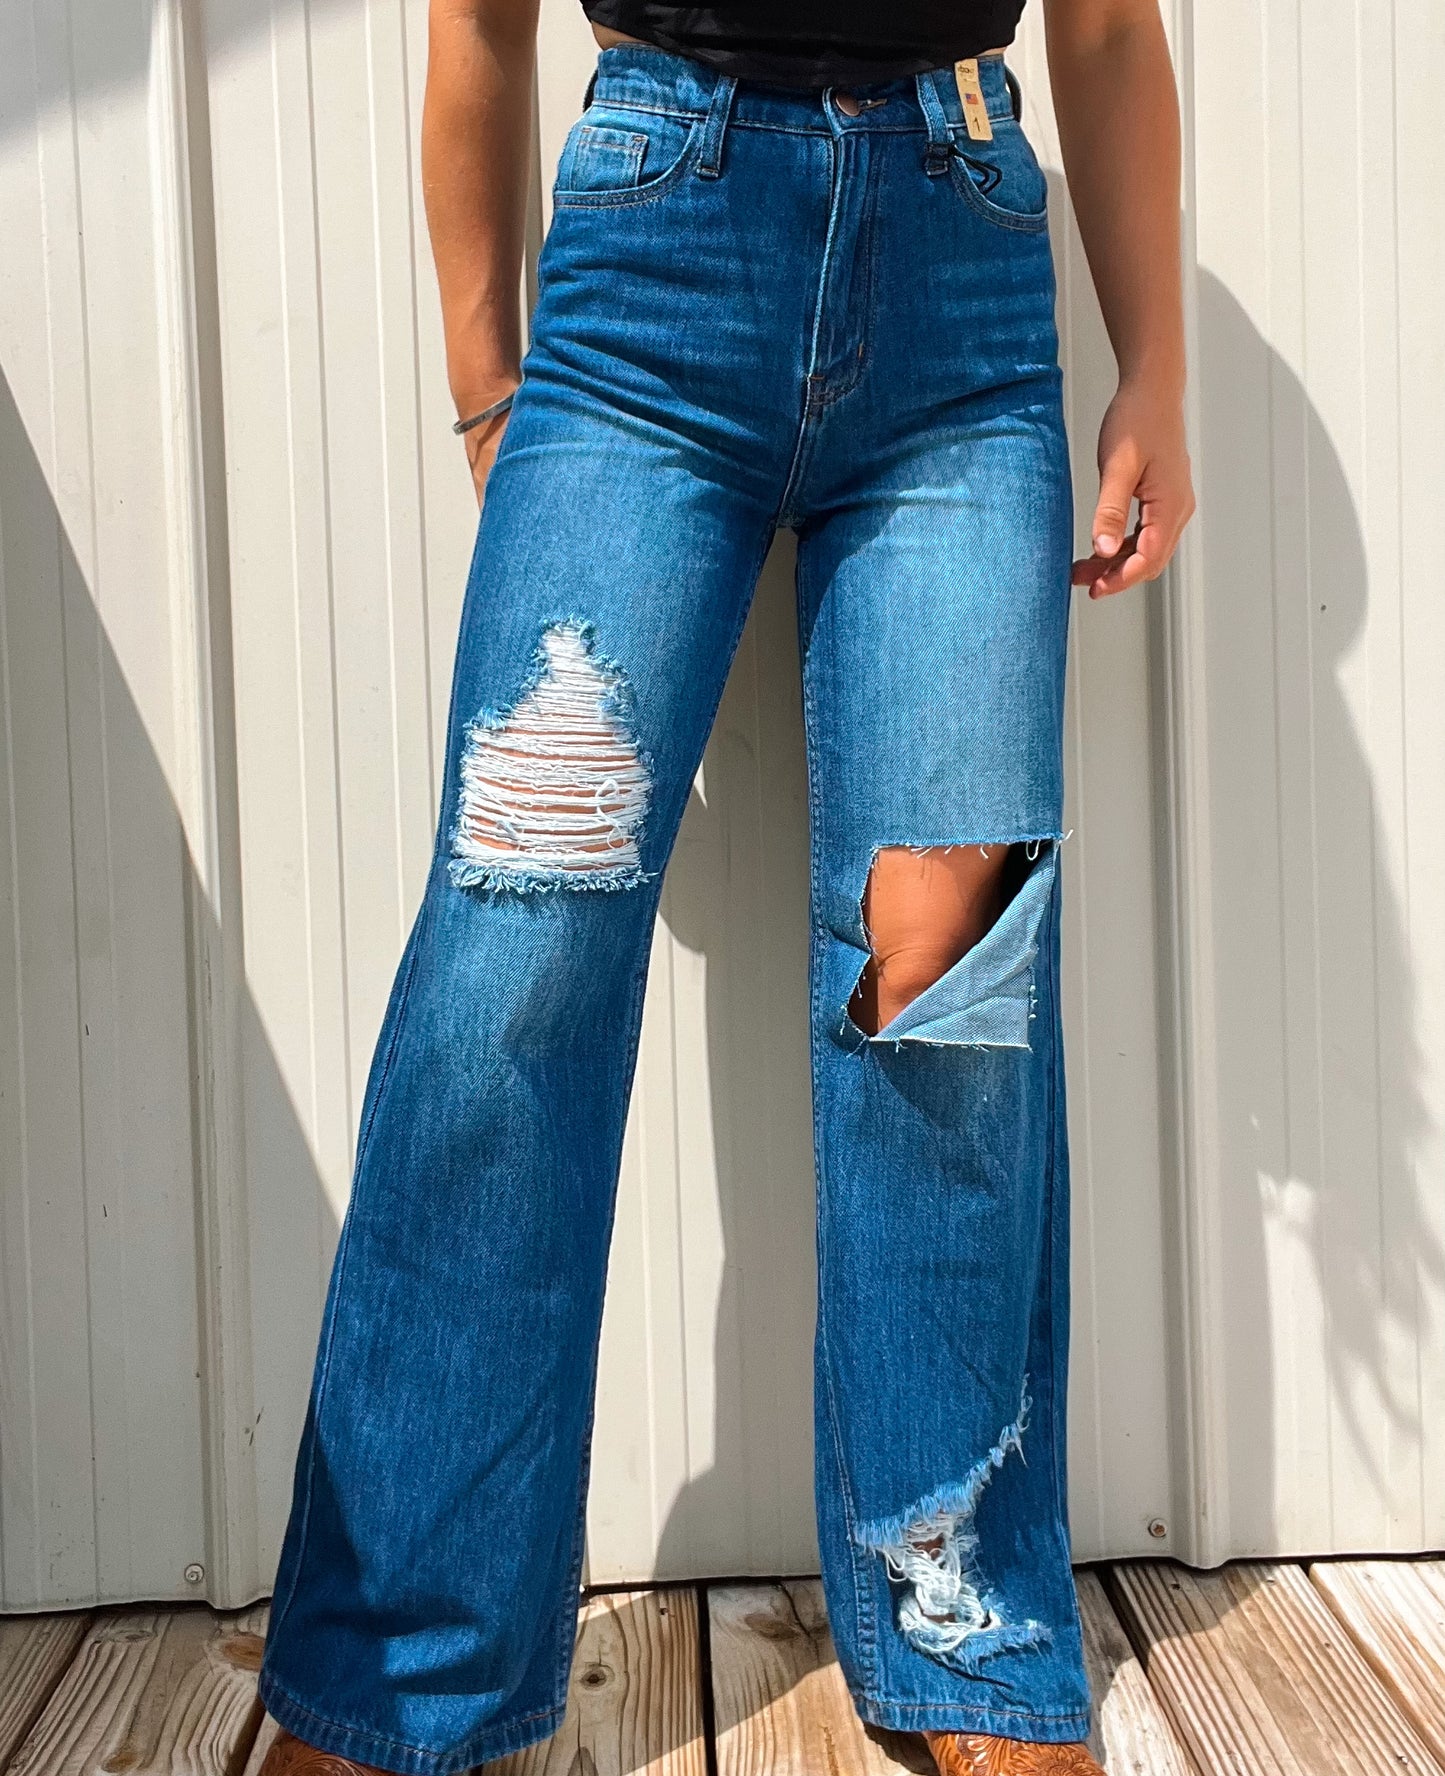 The Westbrook Jeans